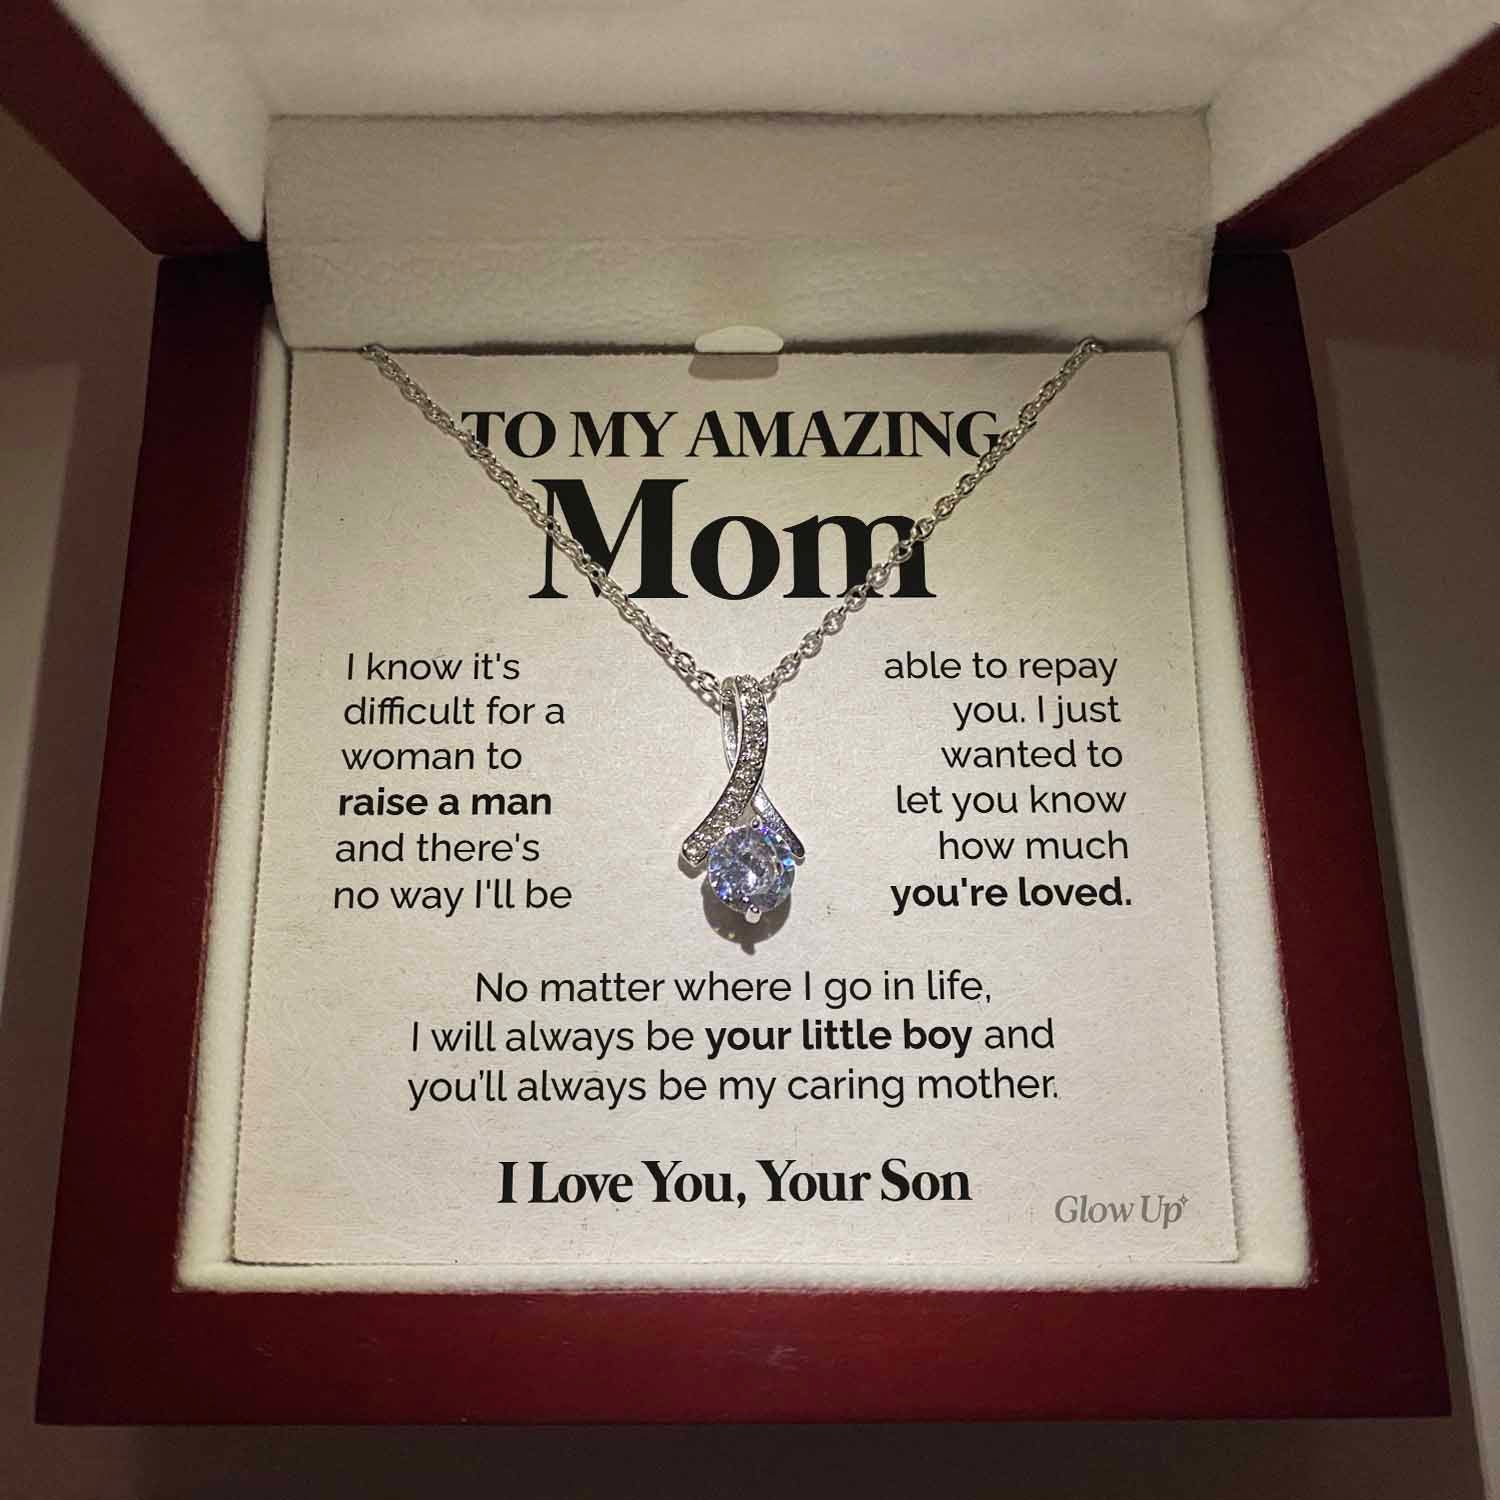 ShineOn Fulfillment Jewelry Two Toned Box To my Amazing Mom - My caring mother - Ribbon Necklace